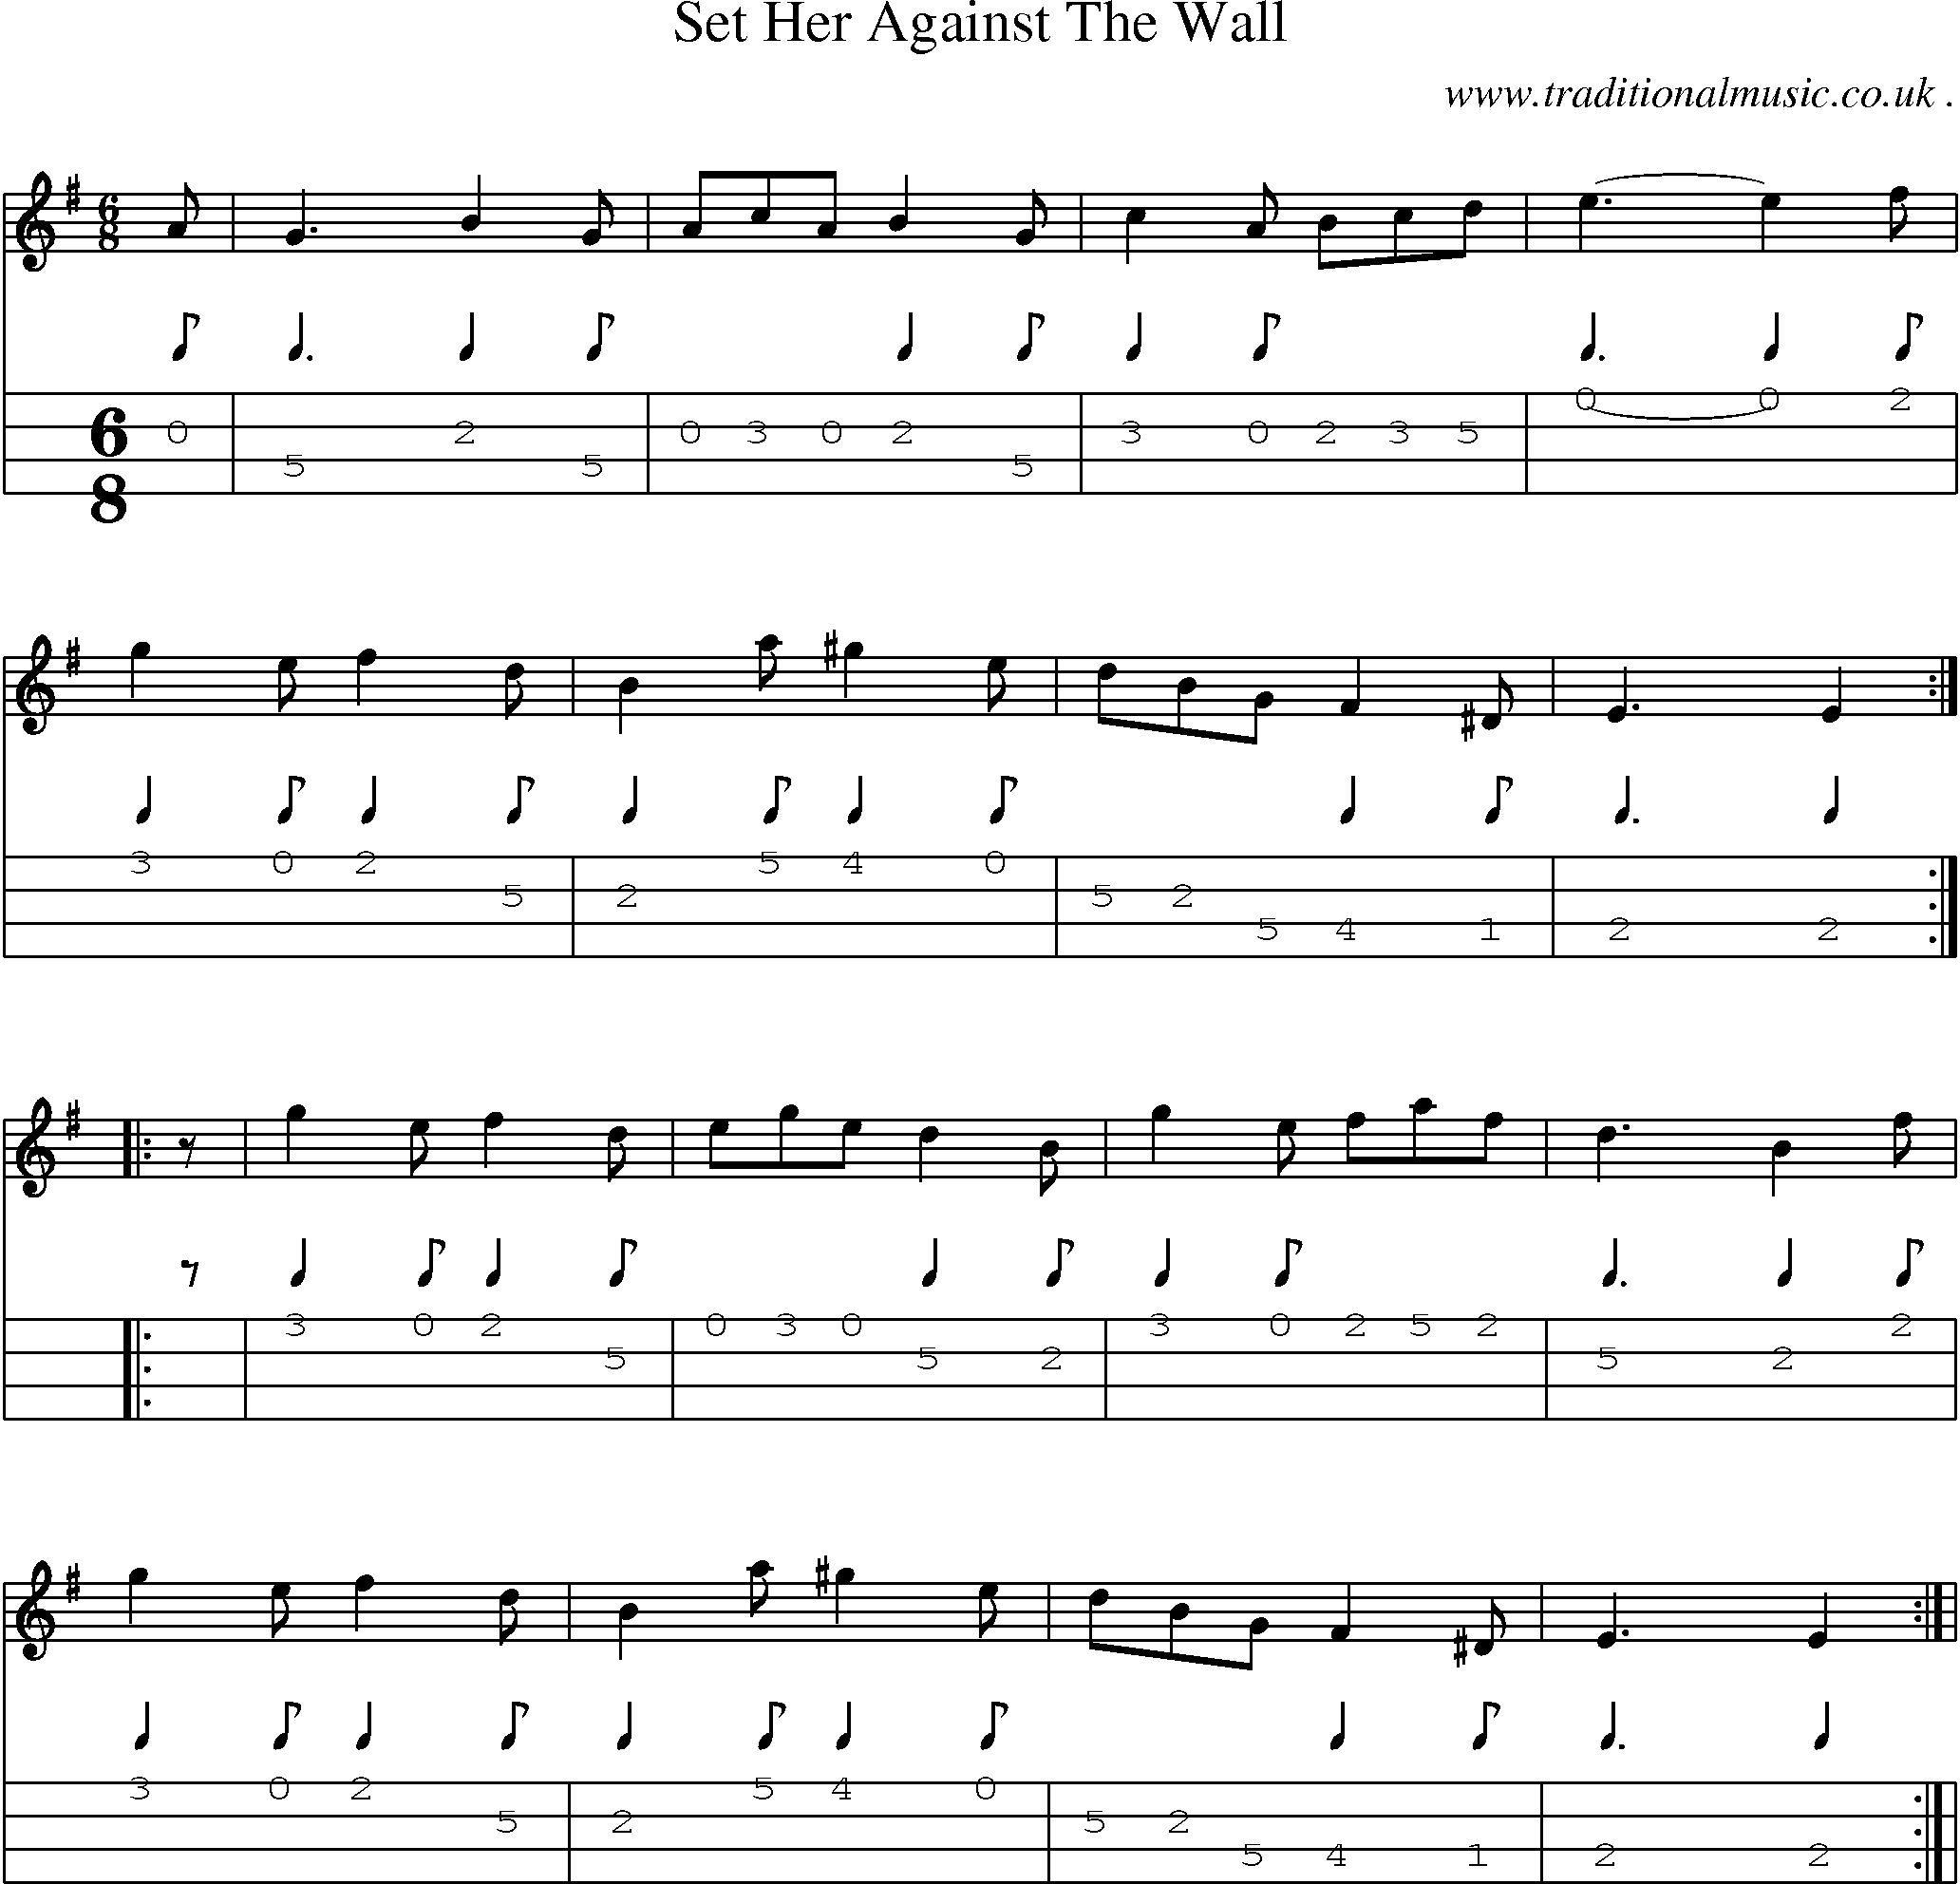 Sheet-Music and Mandolin Tabs for Set Her Against The Wall